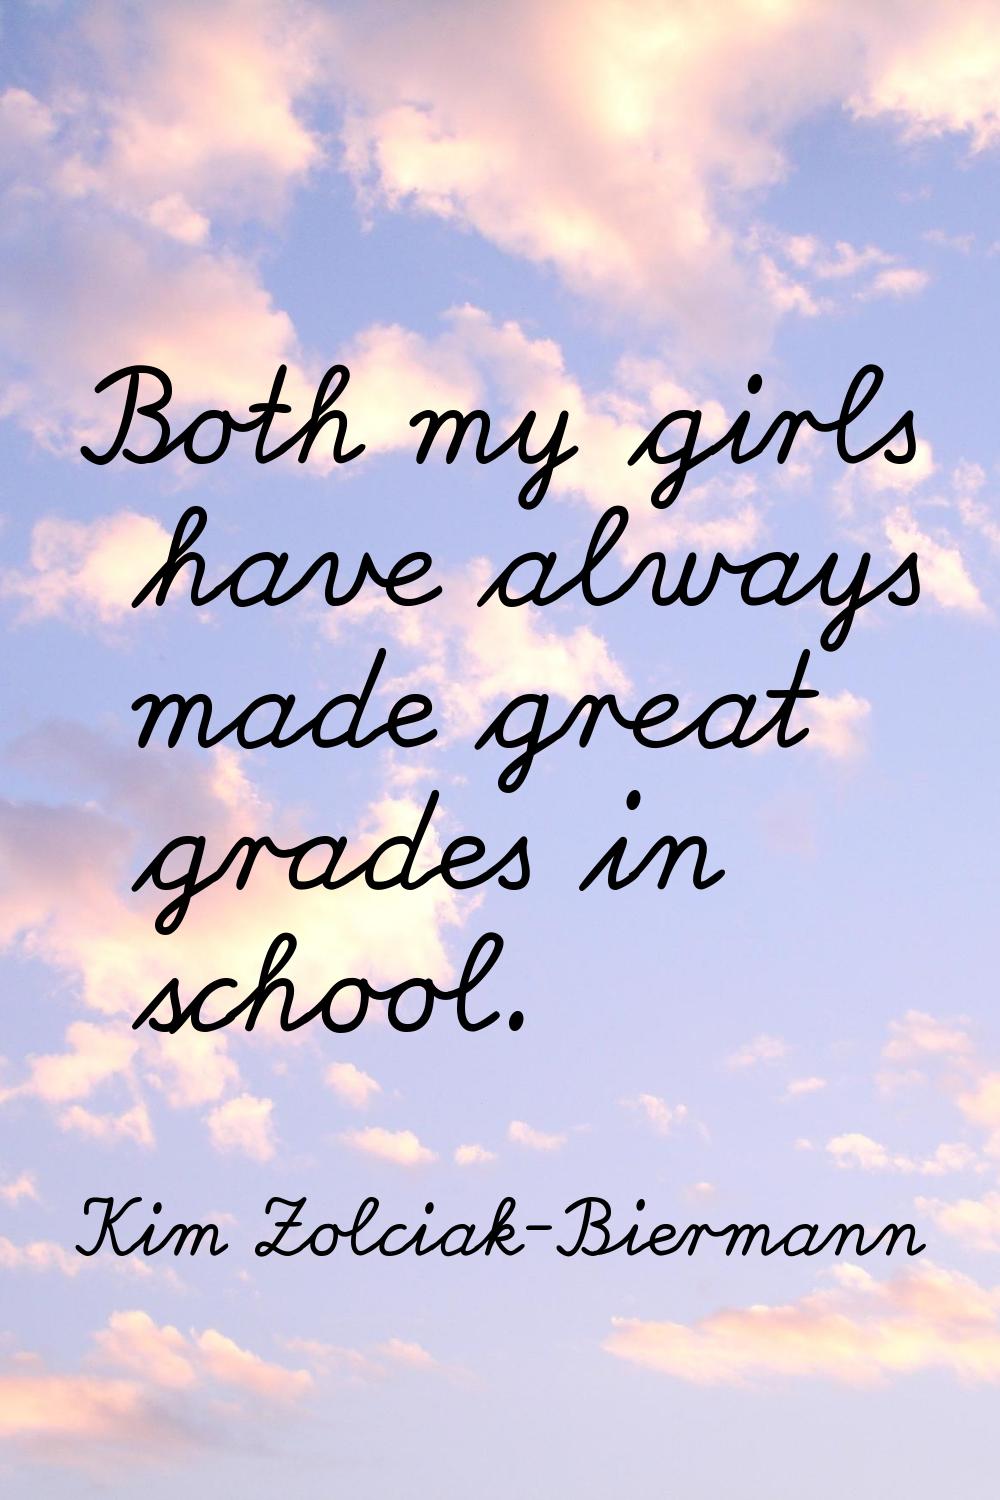 Both my girls have always made great grades in school.